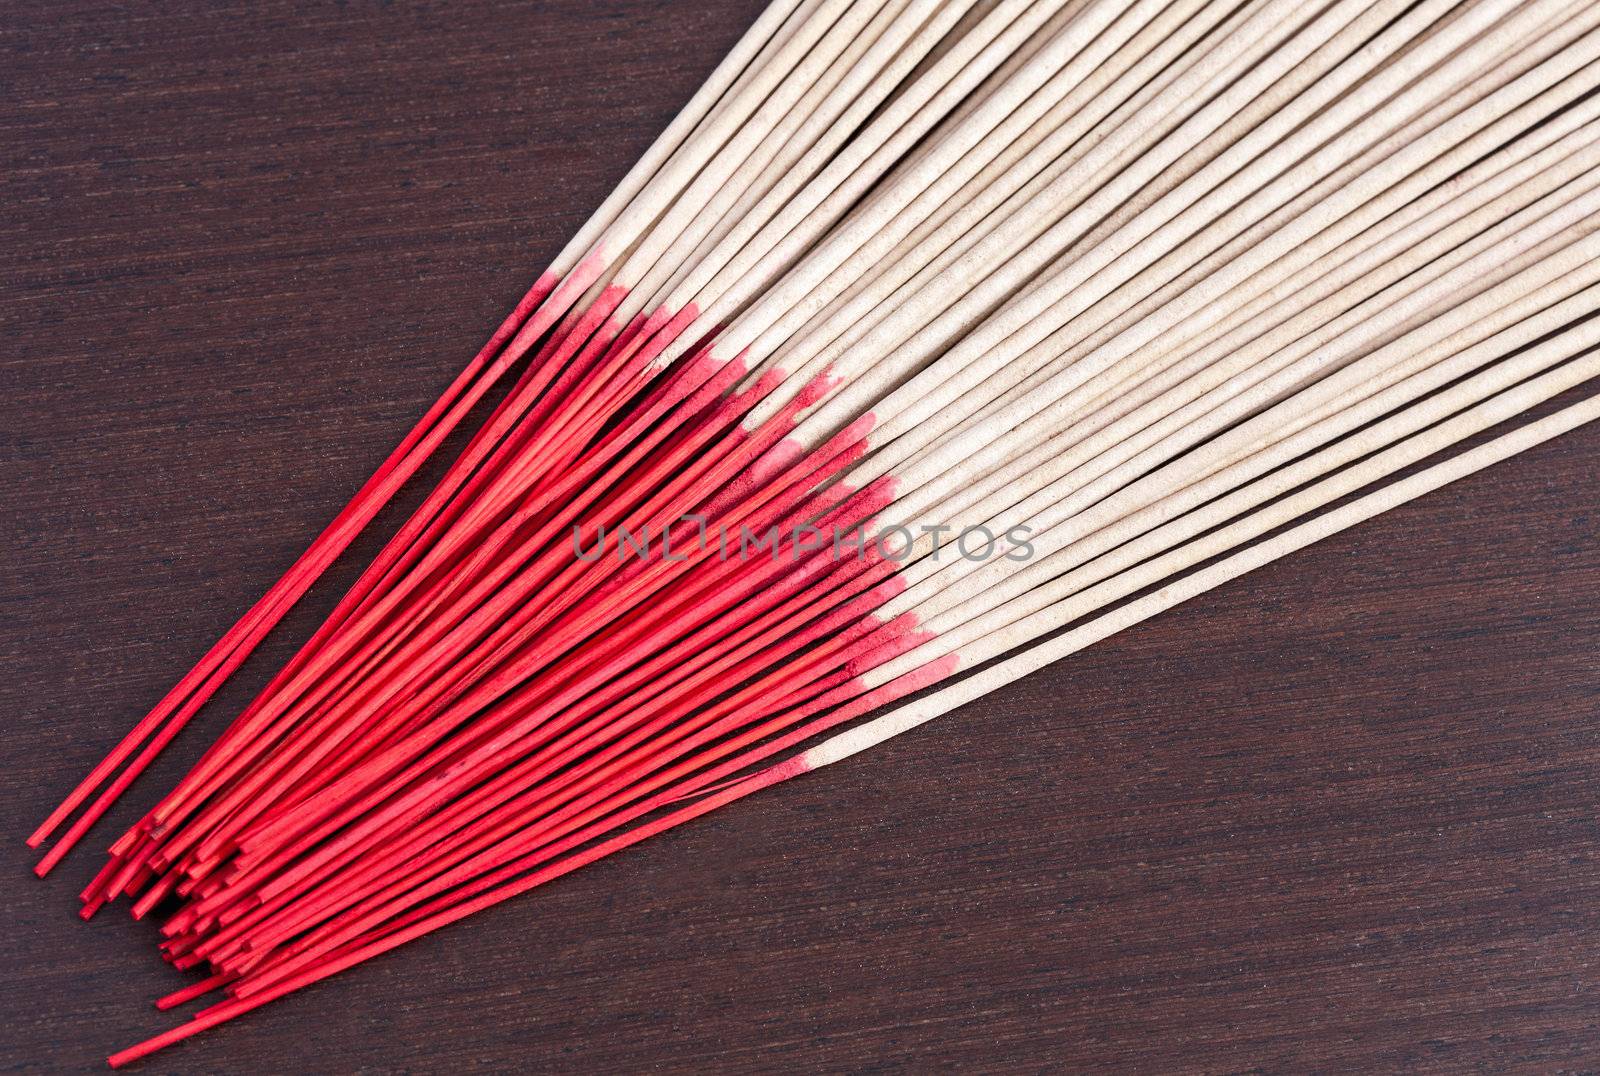 Incense aromatic sticks on the wooden background